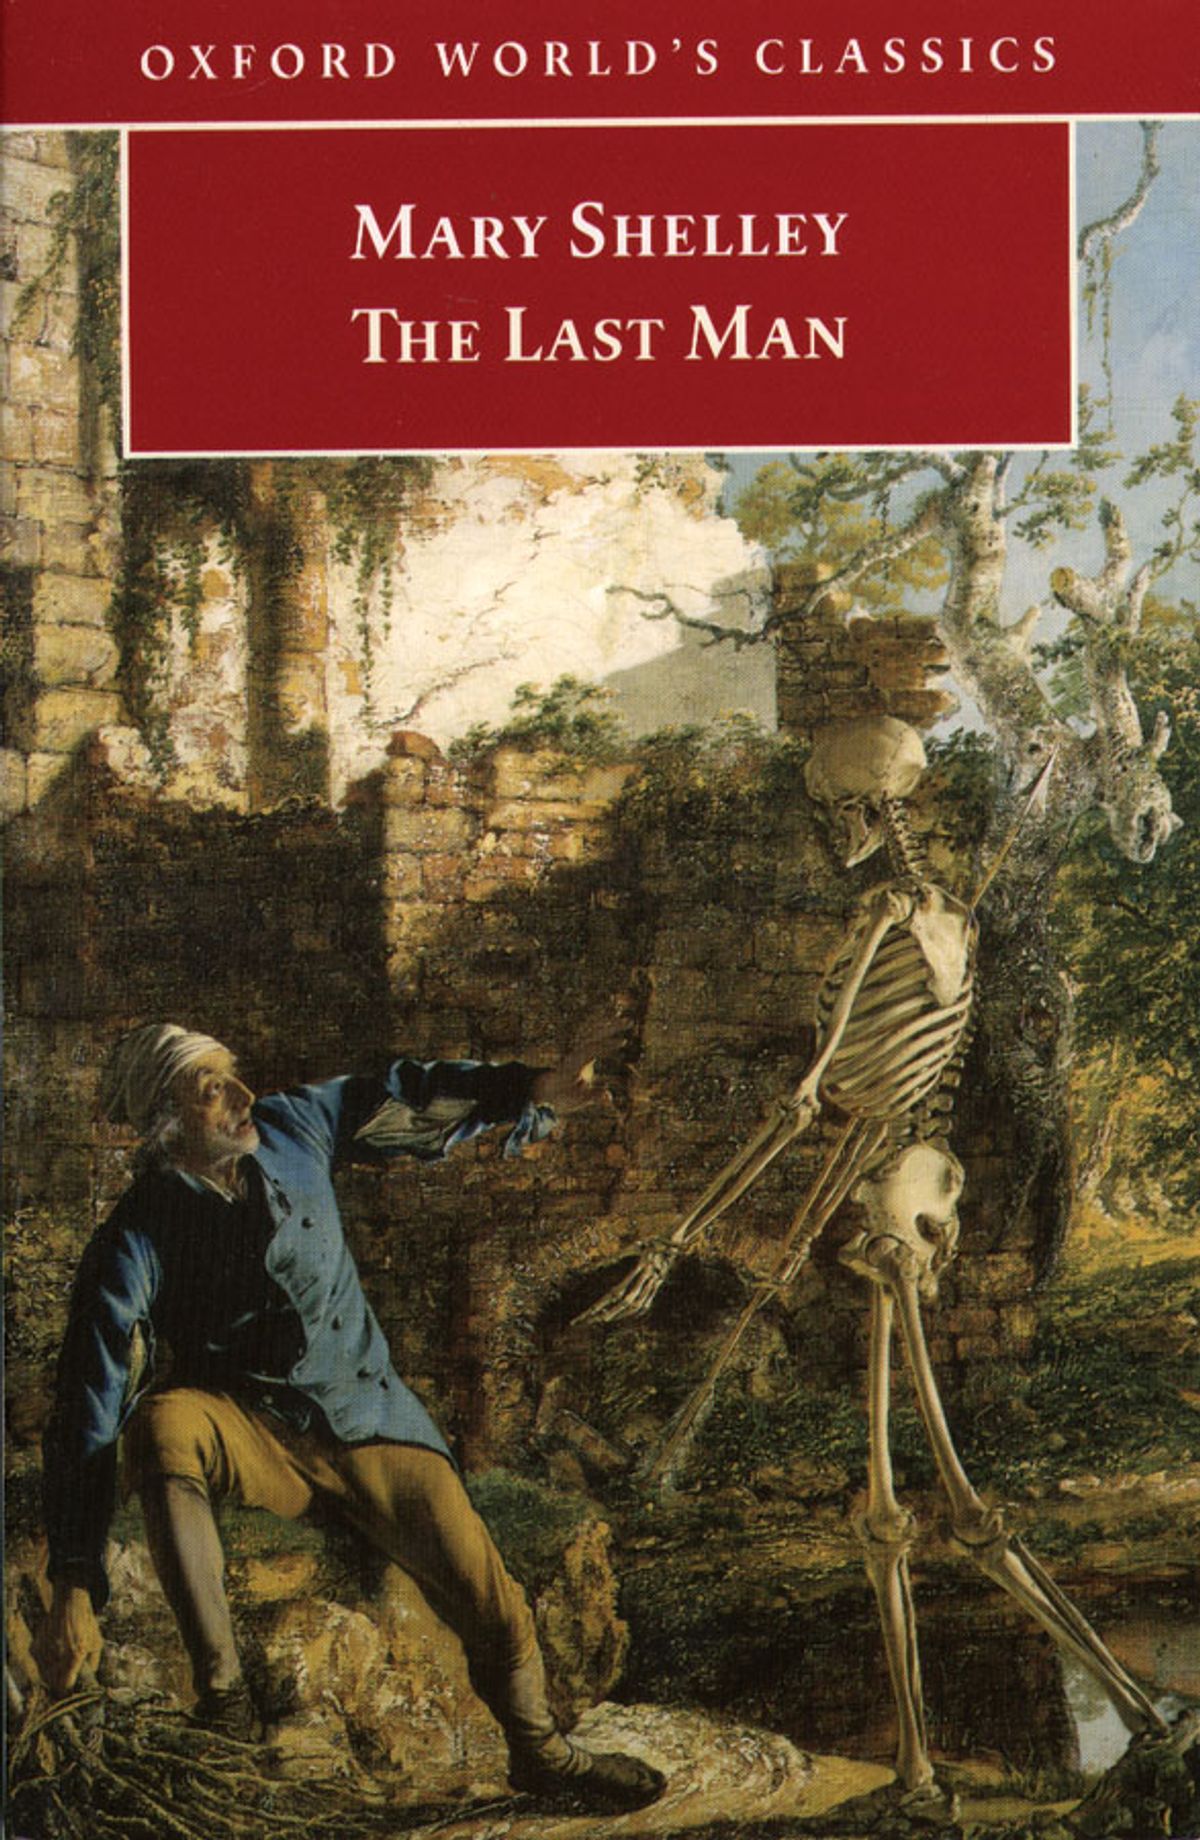 mary shelley the last man ebook torrents